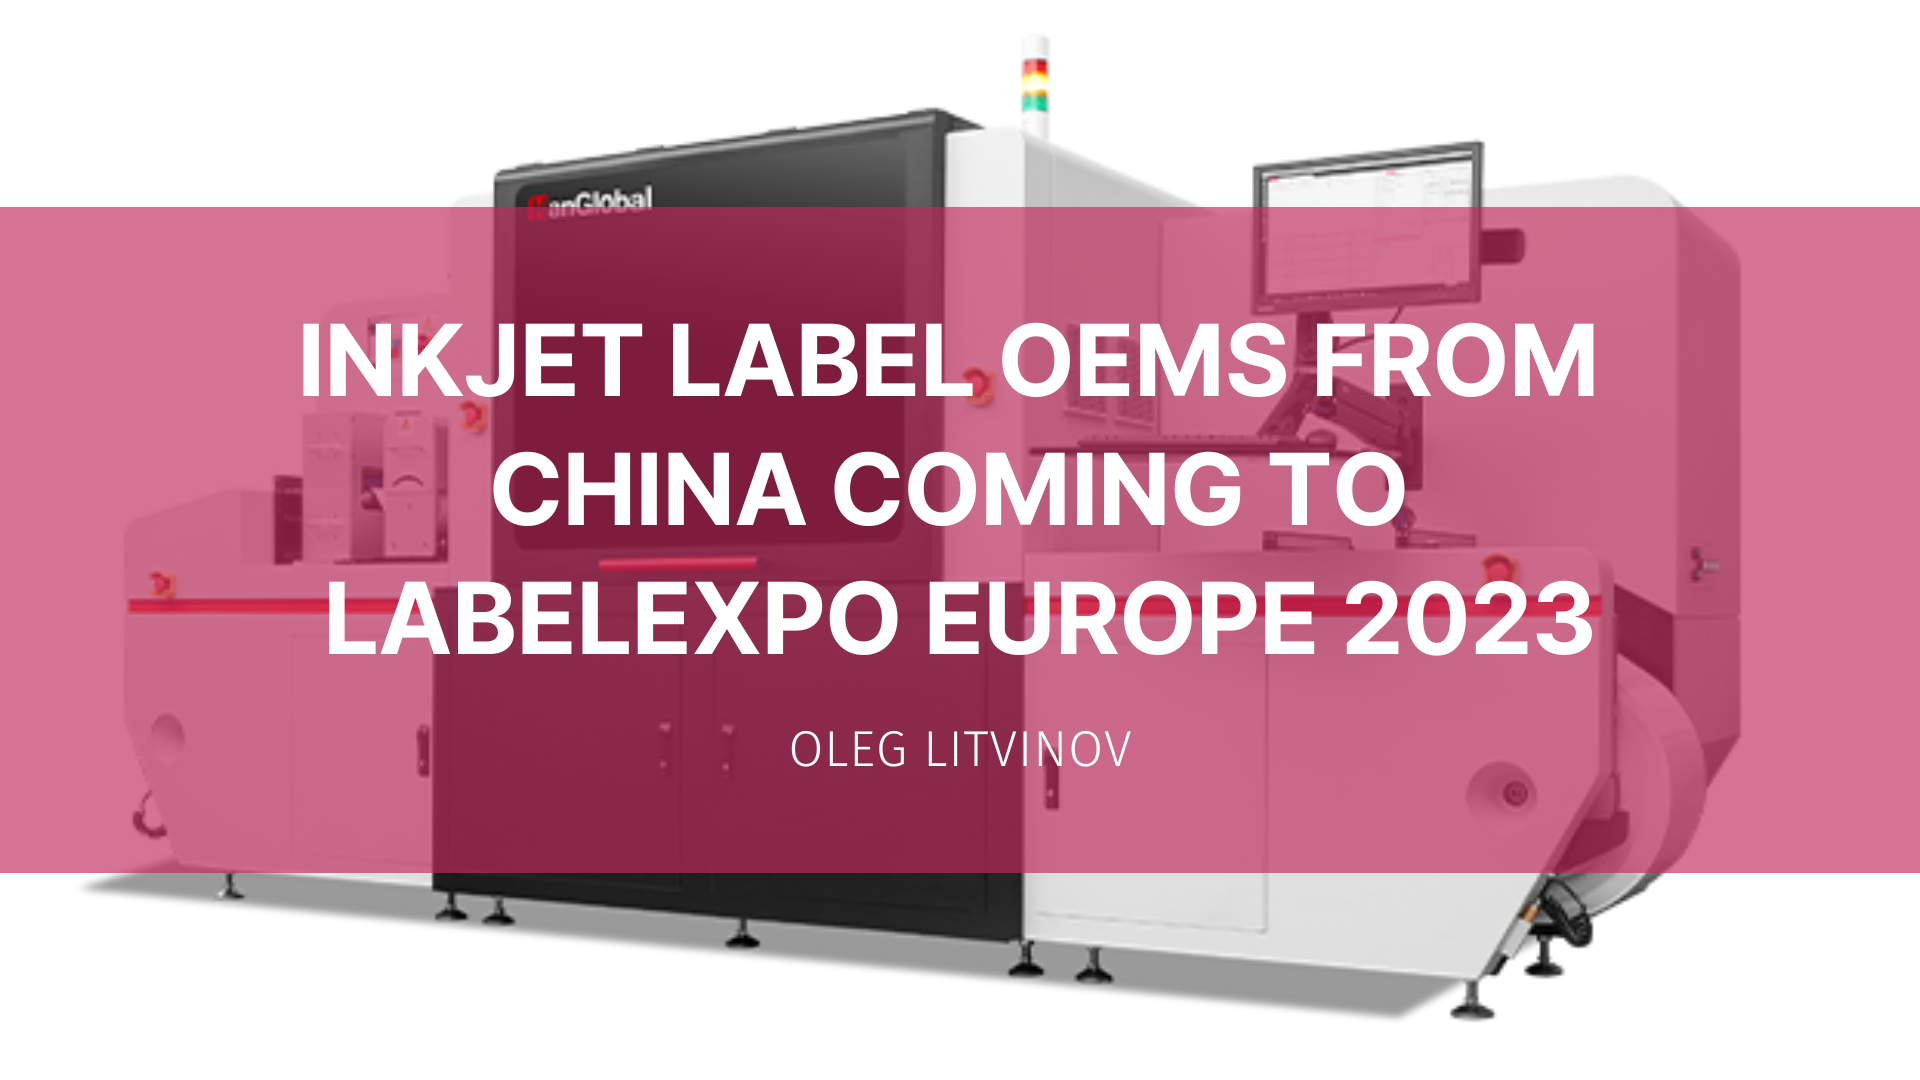 Featured image for “Inkjet label OEMs from China coming to Labelexpo Europe 2023”